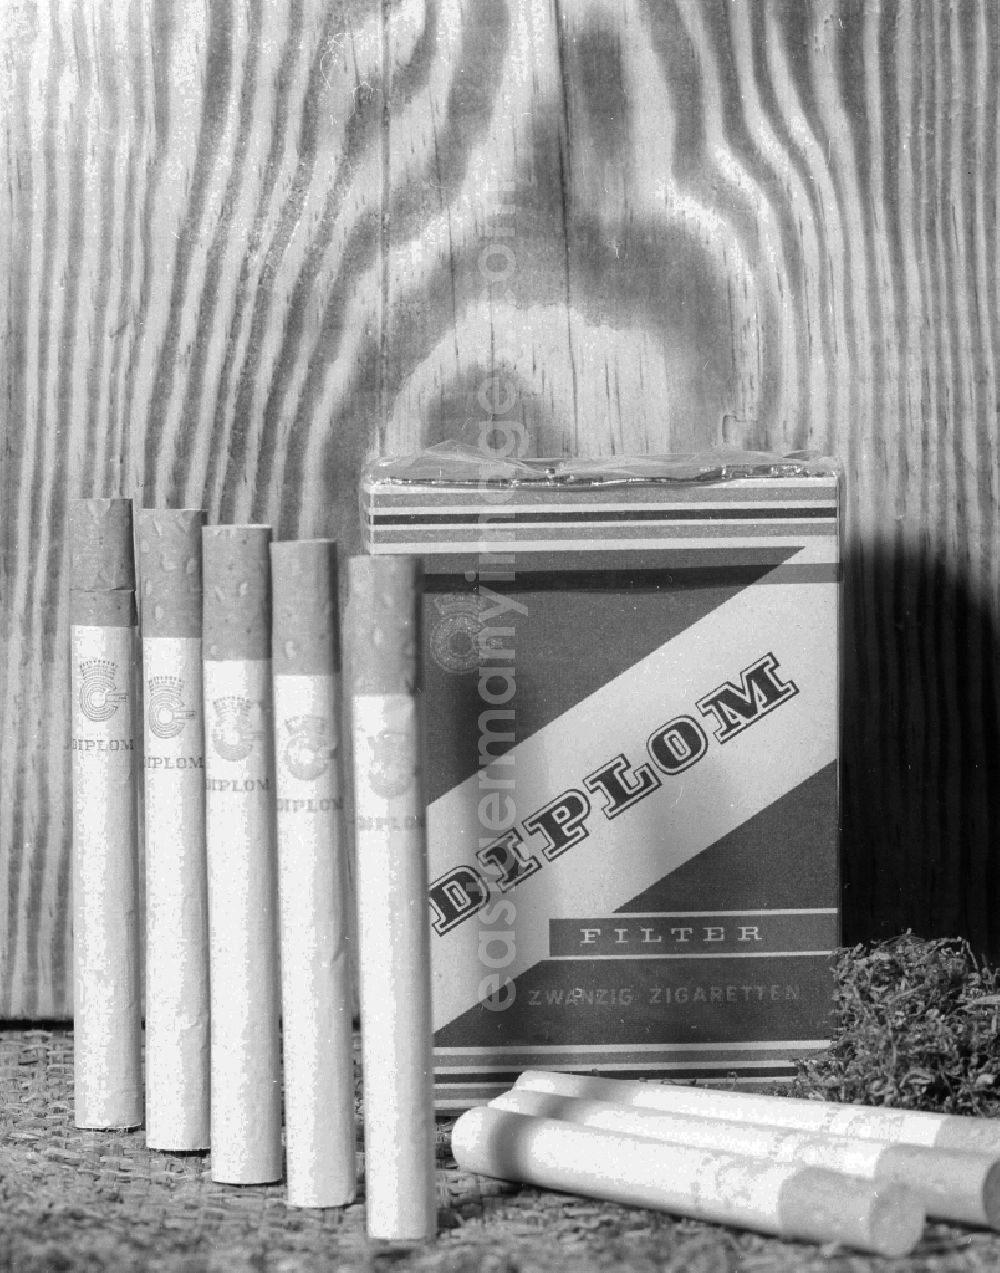 GDR photo archive: Berlin - Symbolic picture - a packet of filtertip cigarettes of the brand DIPLOM in Berlin, the former capital of the GDR, German democratic republic